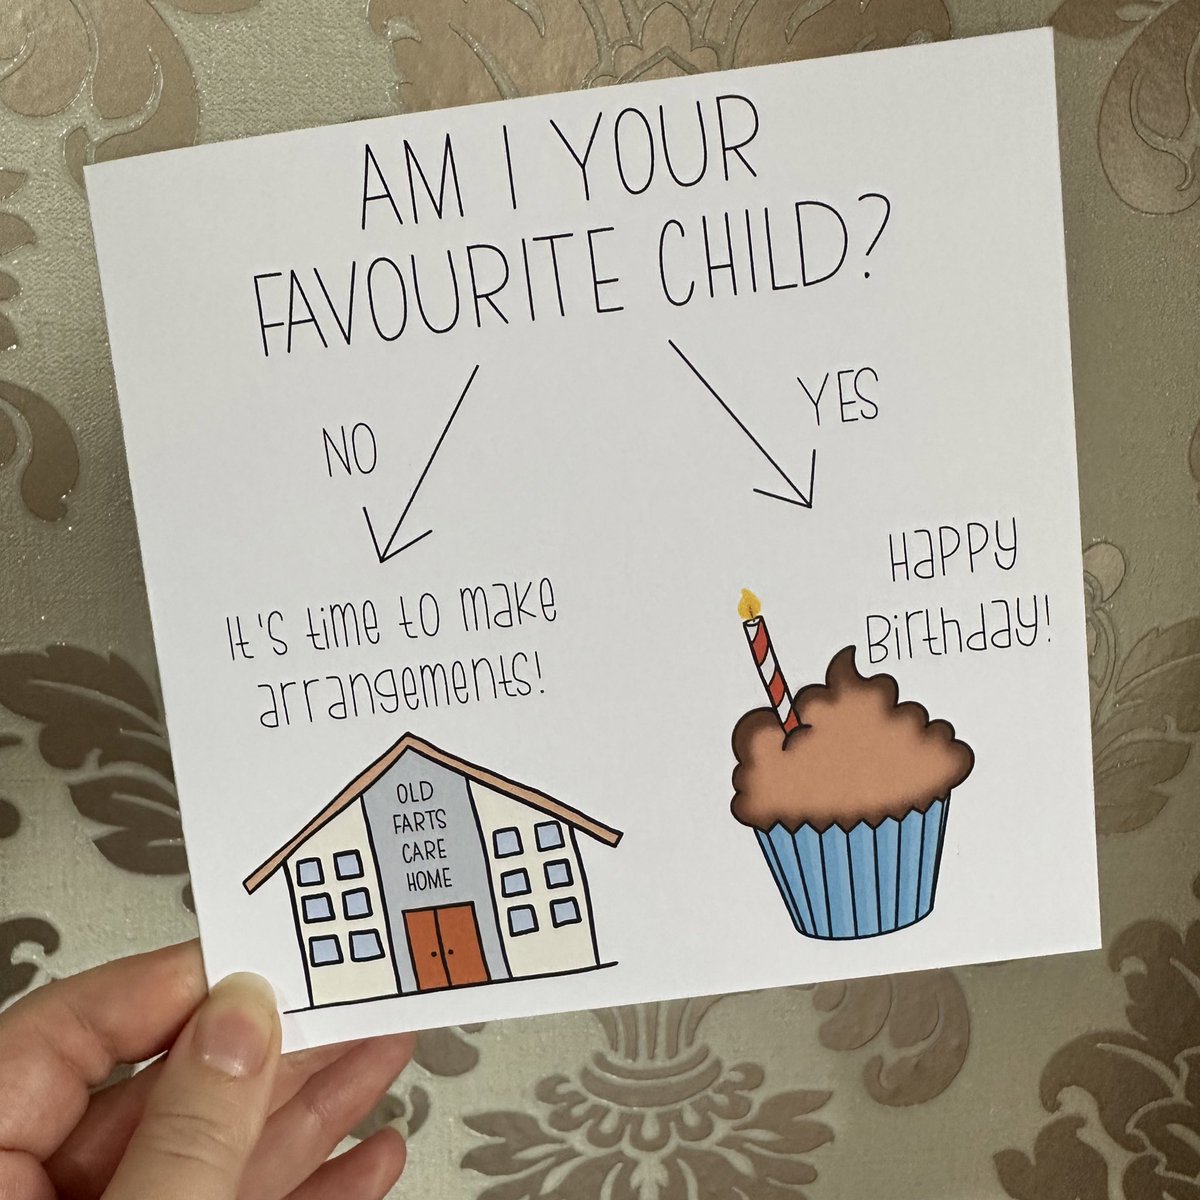 I created this card for my Dad for Father’s Day 😆😂 and I’ve just made it into a Birthday card 😆

I’m an only child by the way but my boyfriend is most definitely the favourite of my parents now 😆🤣

#elevenseshour #mhhsbd #SBS #UKMakers #CraftBizParty #SmartSocial